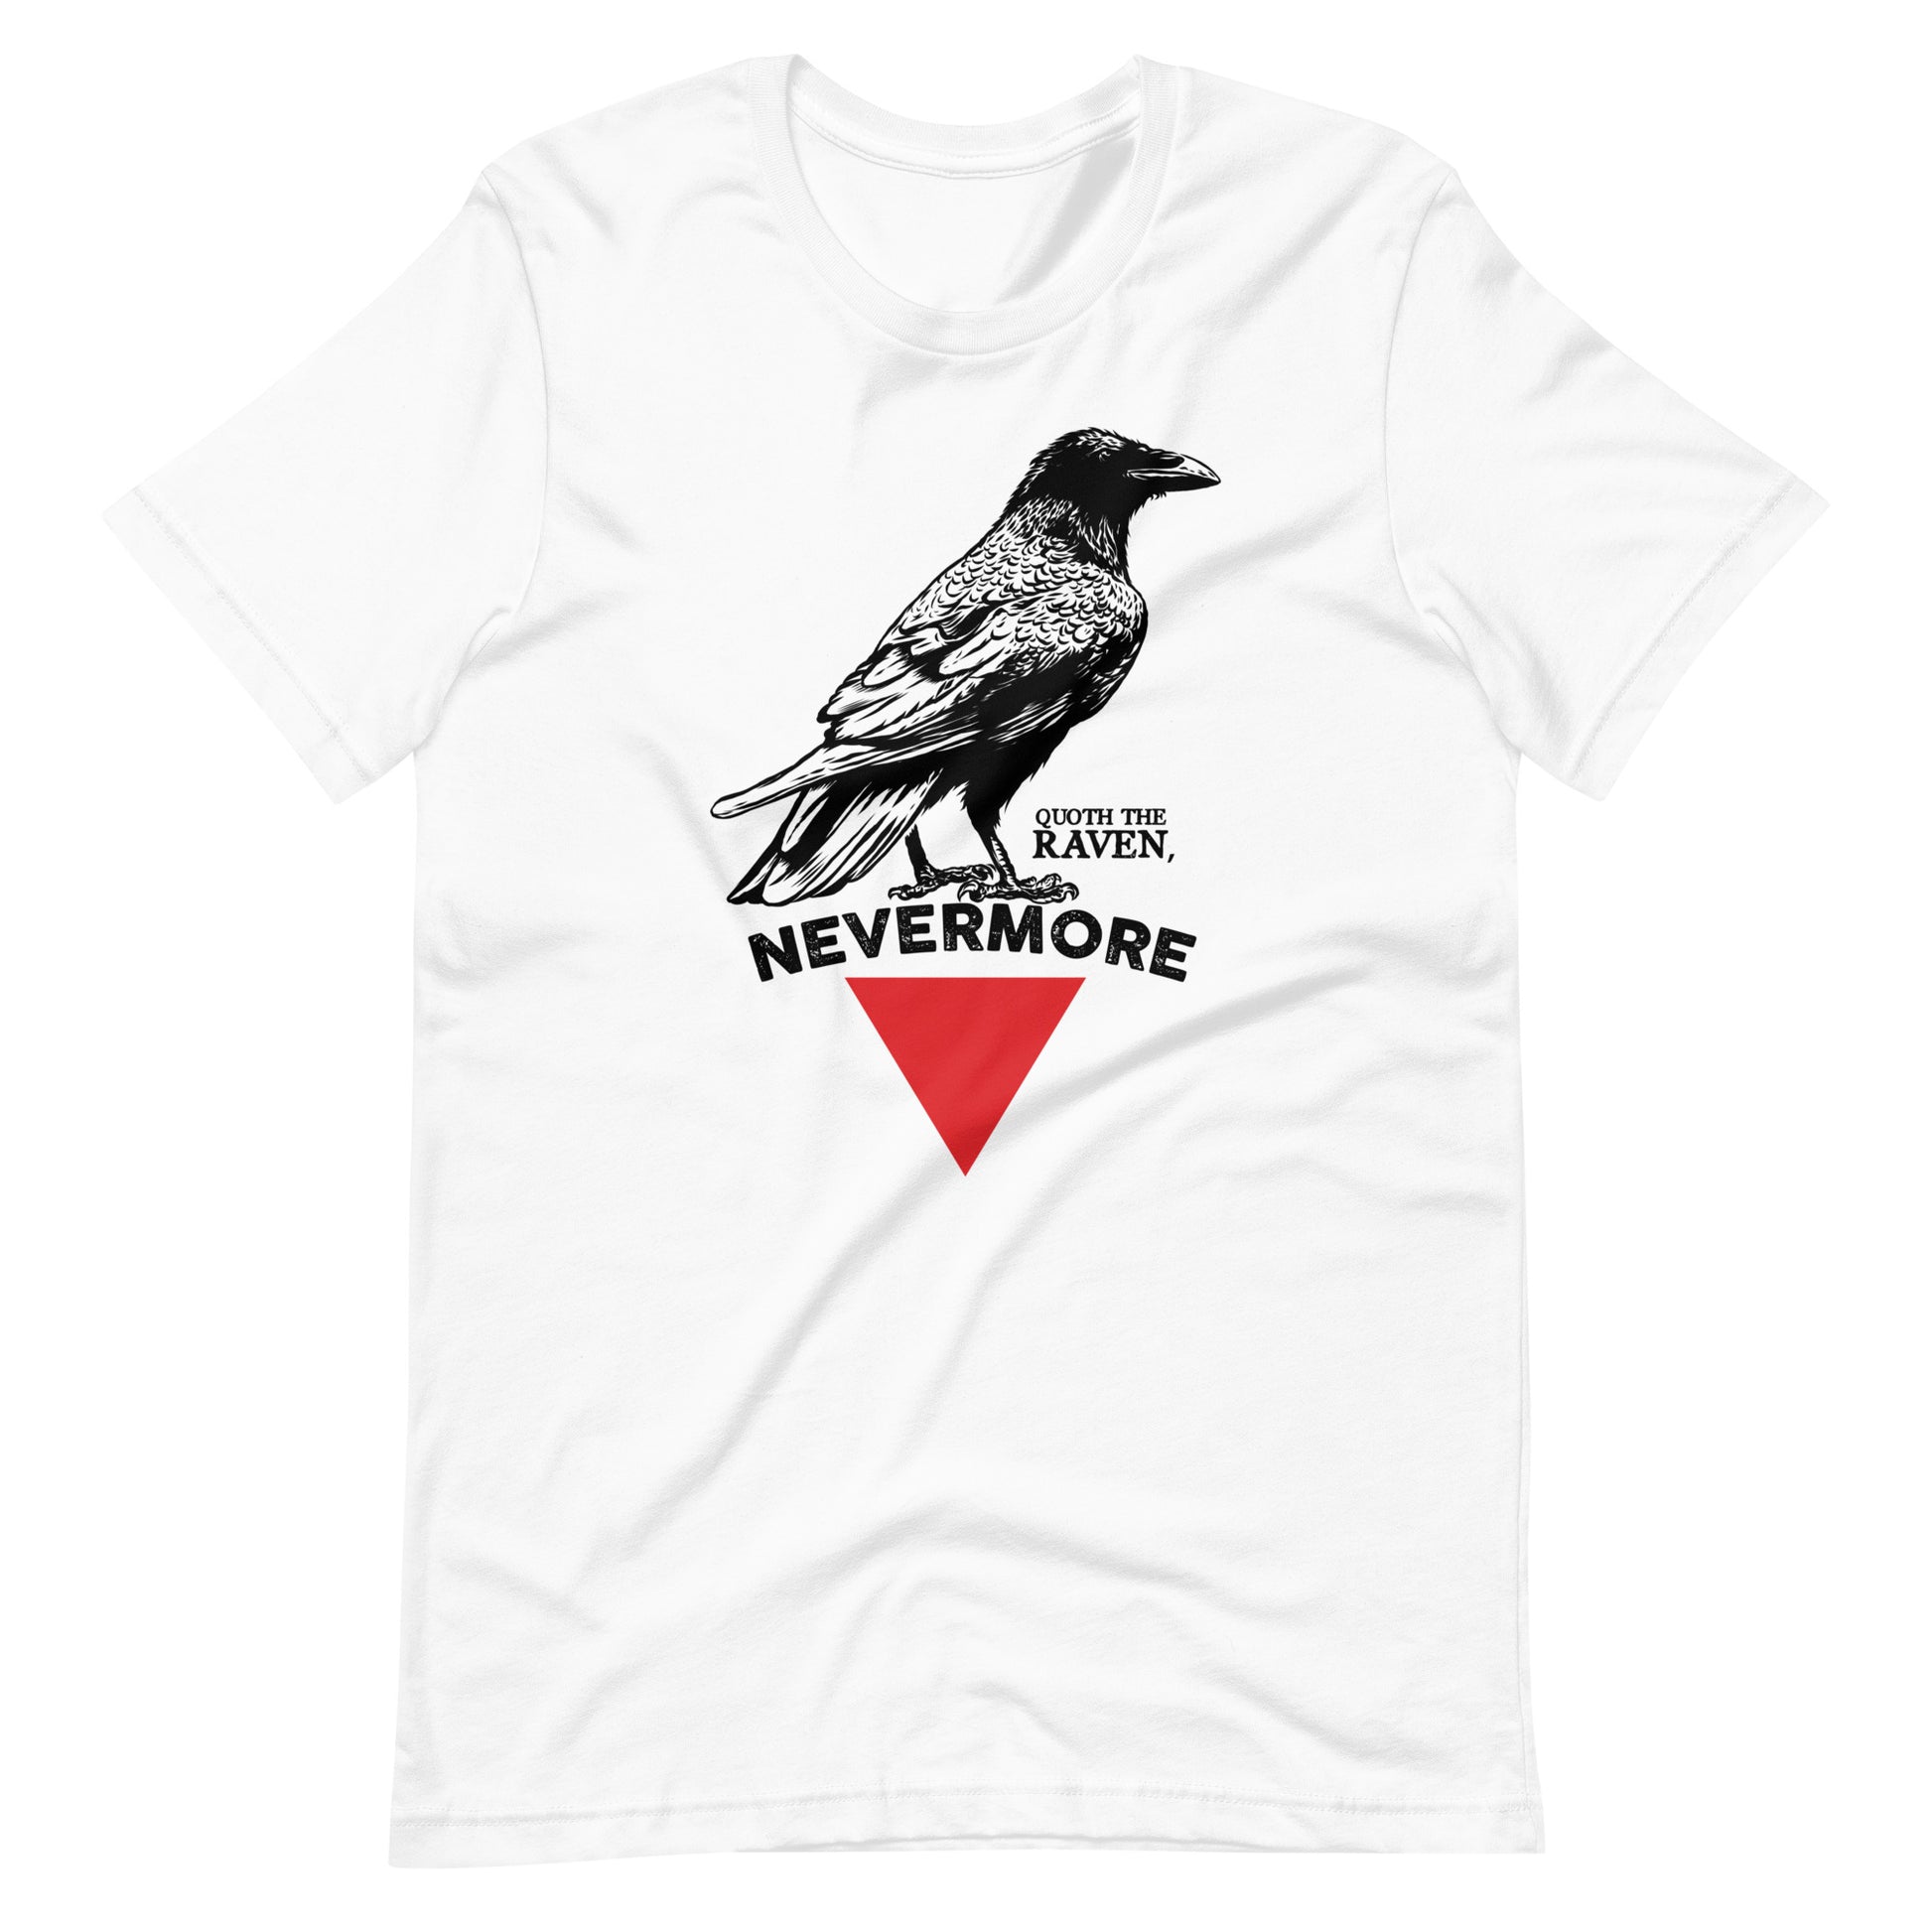 The Raven Nevermore Triangle - Men's t-shirt - White Front